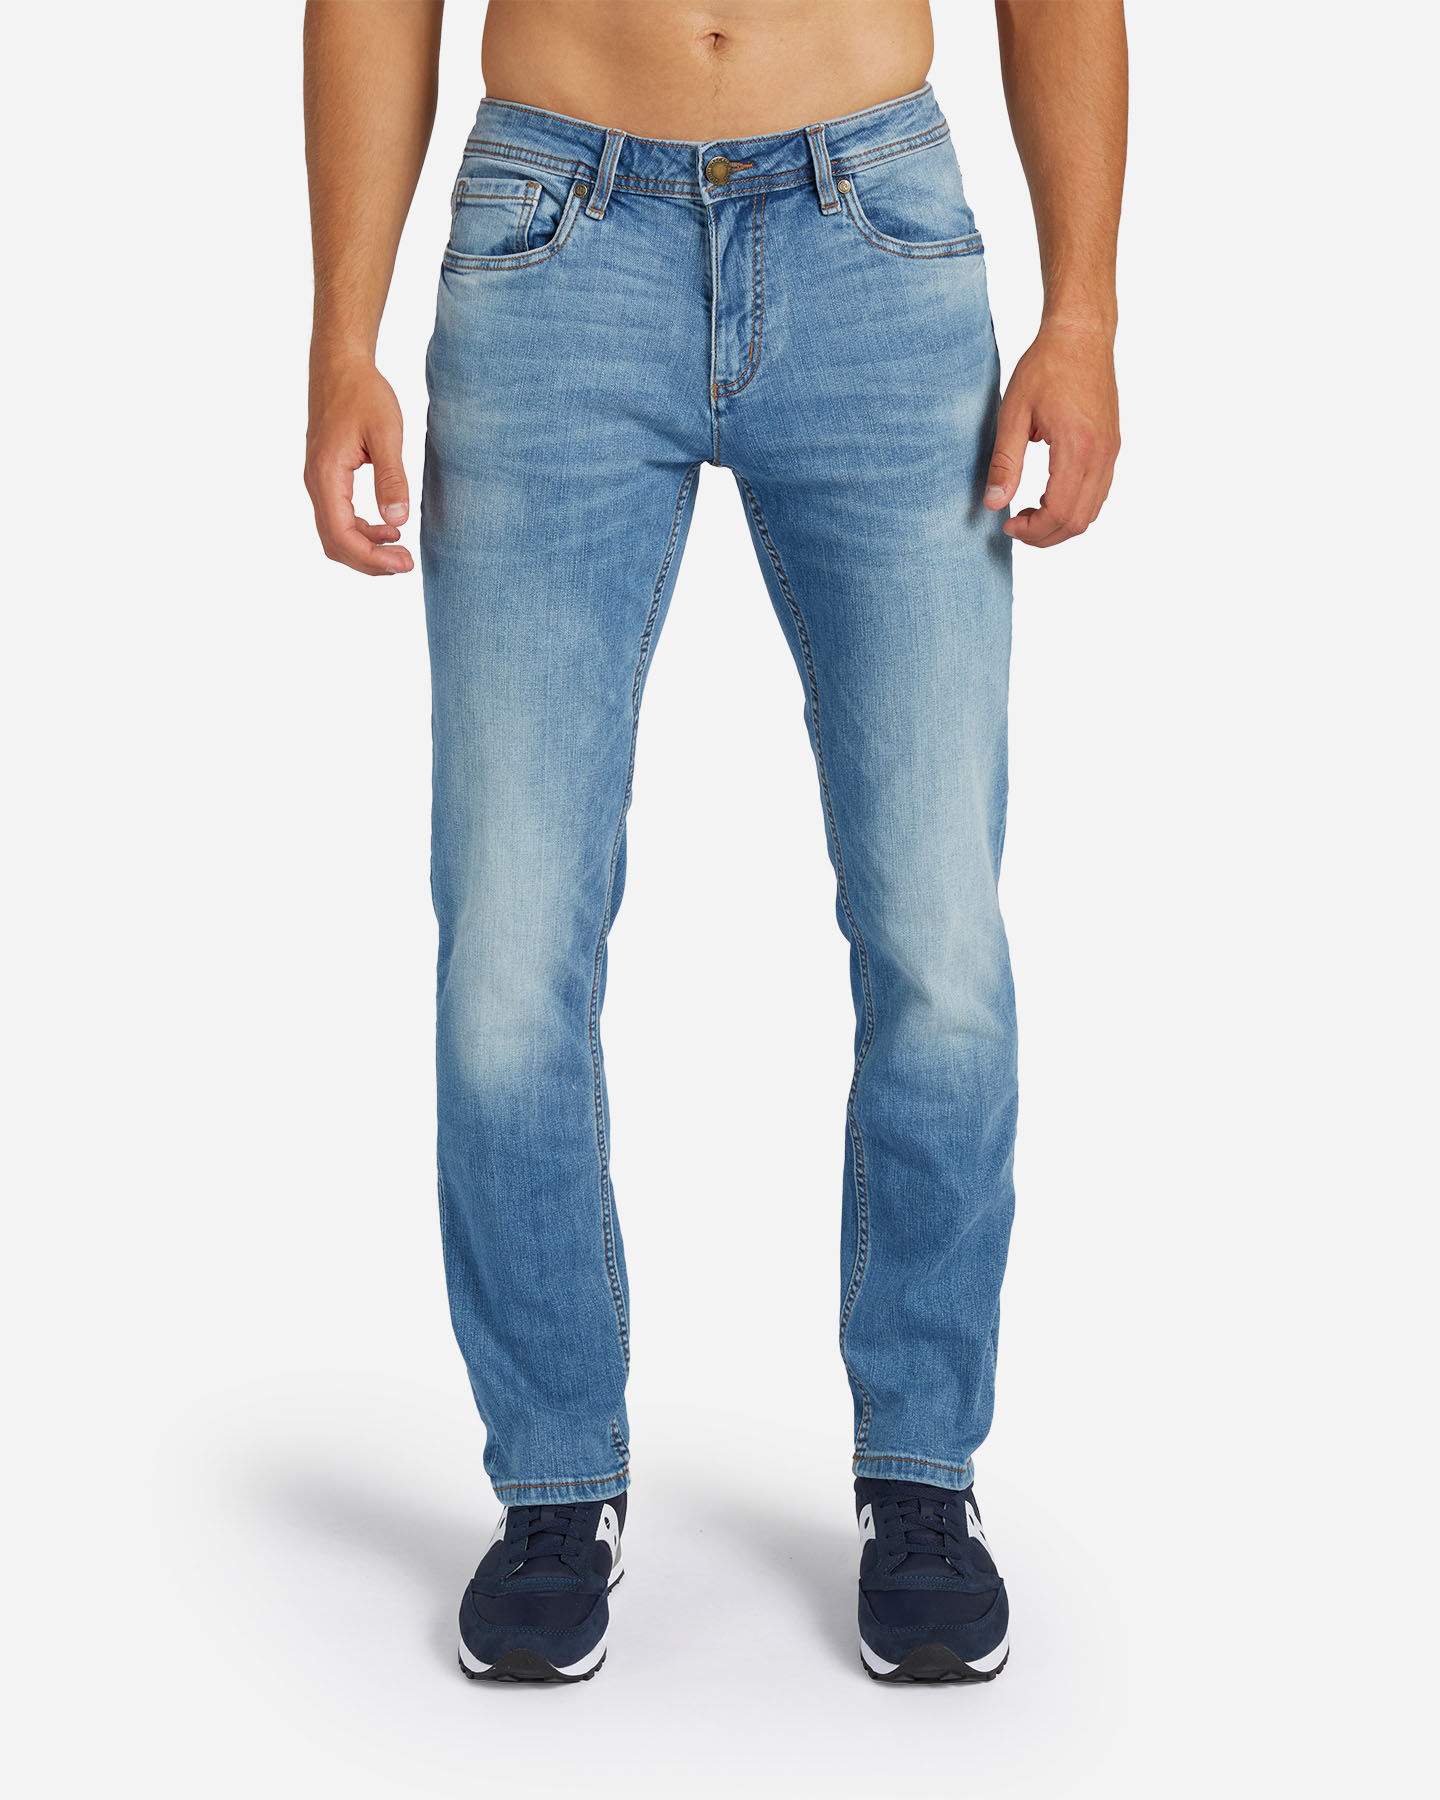  Jeans DACK'S CASUAL CITY M S4106779|MD|44 scatto 0